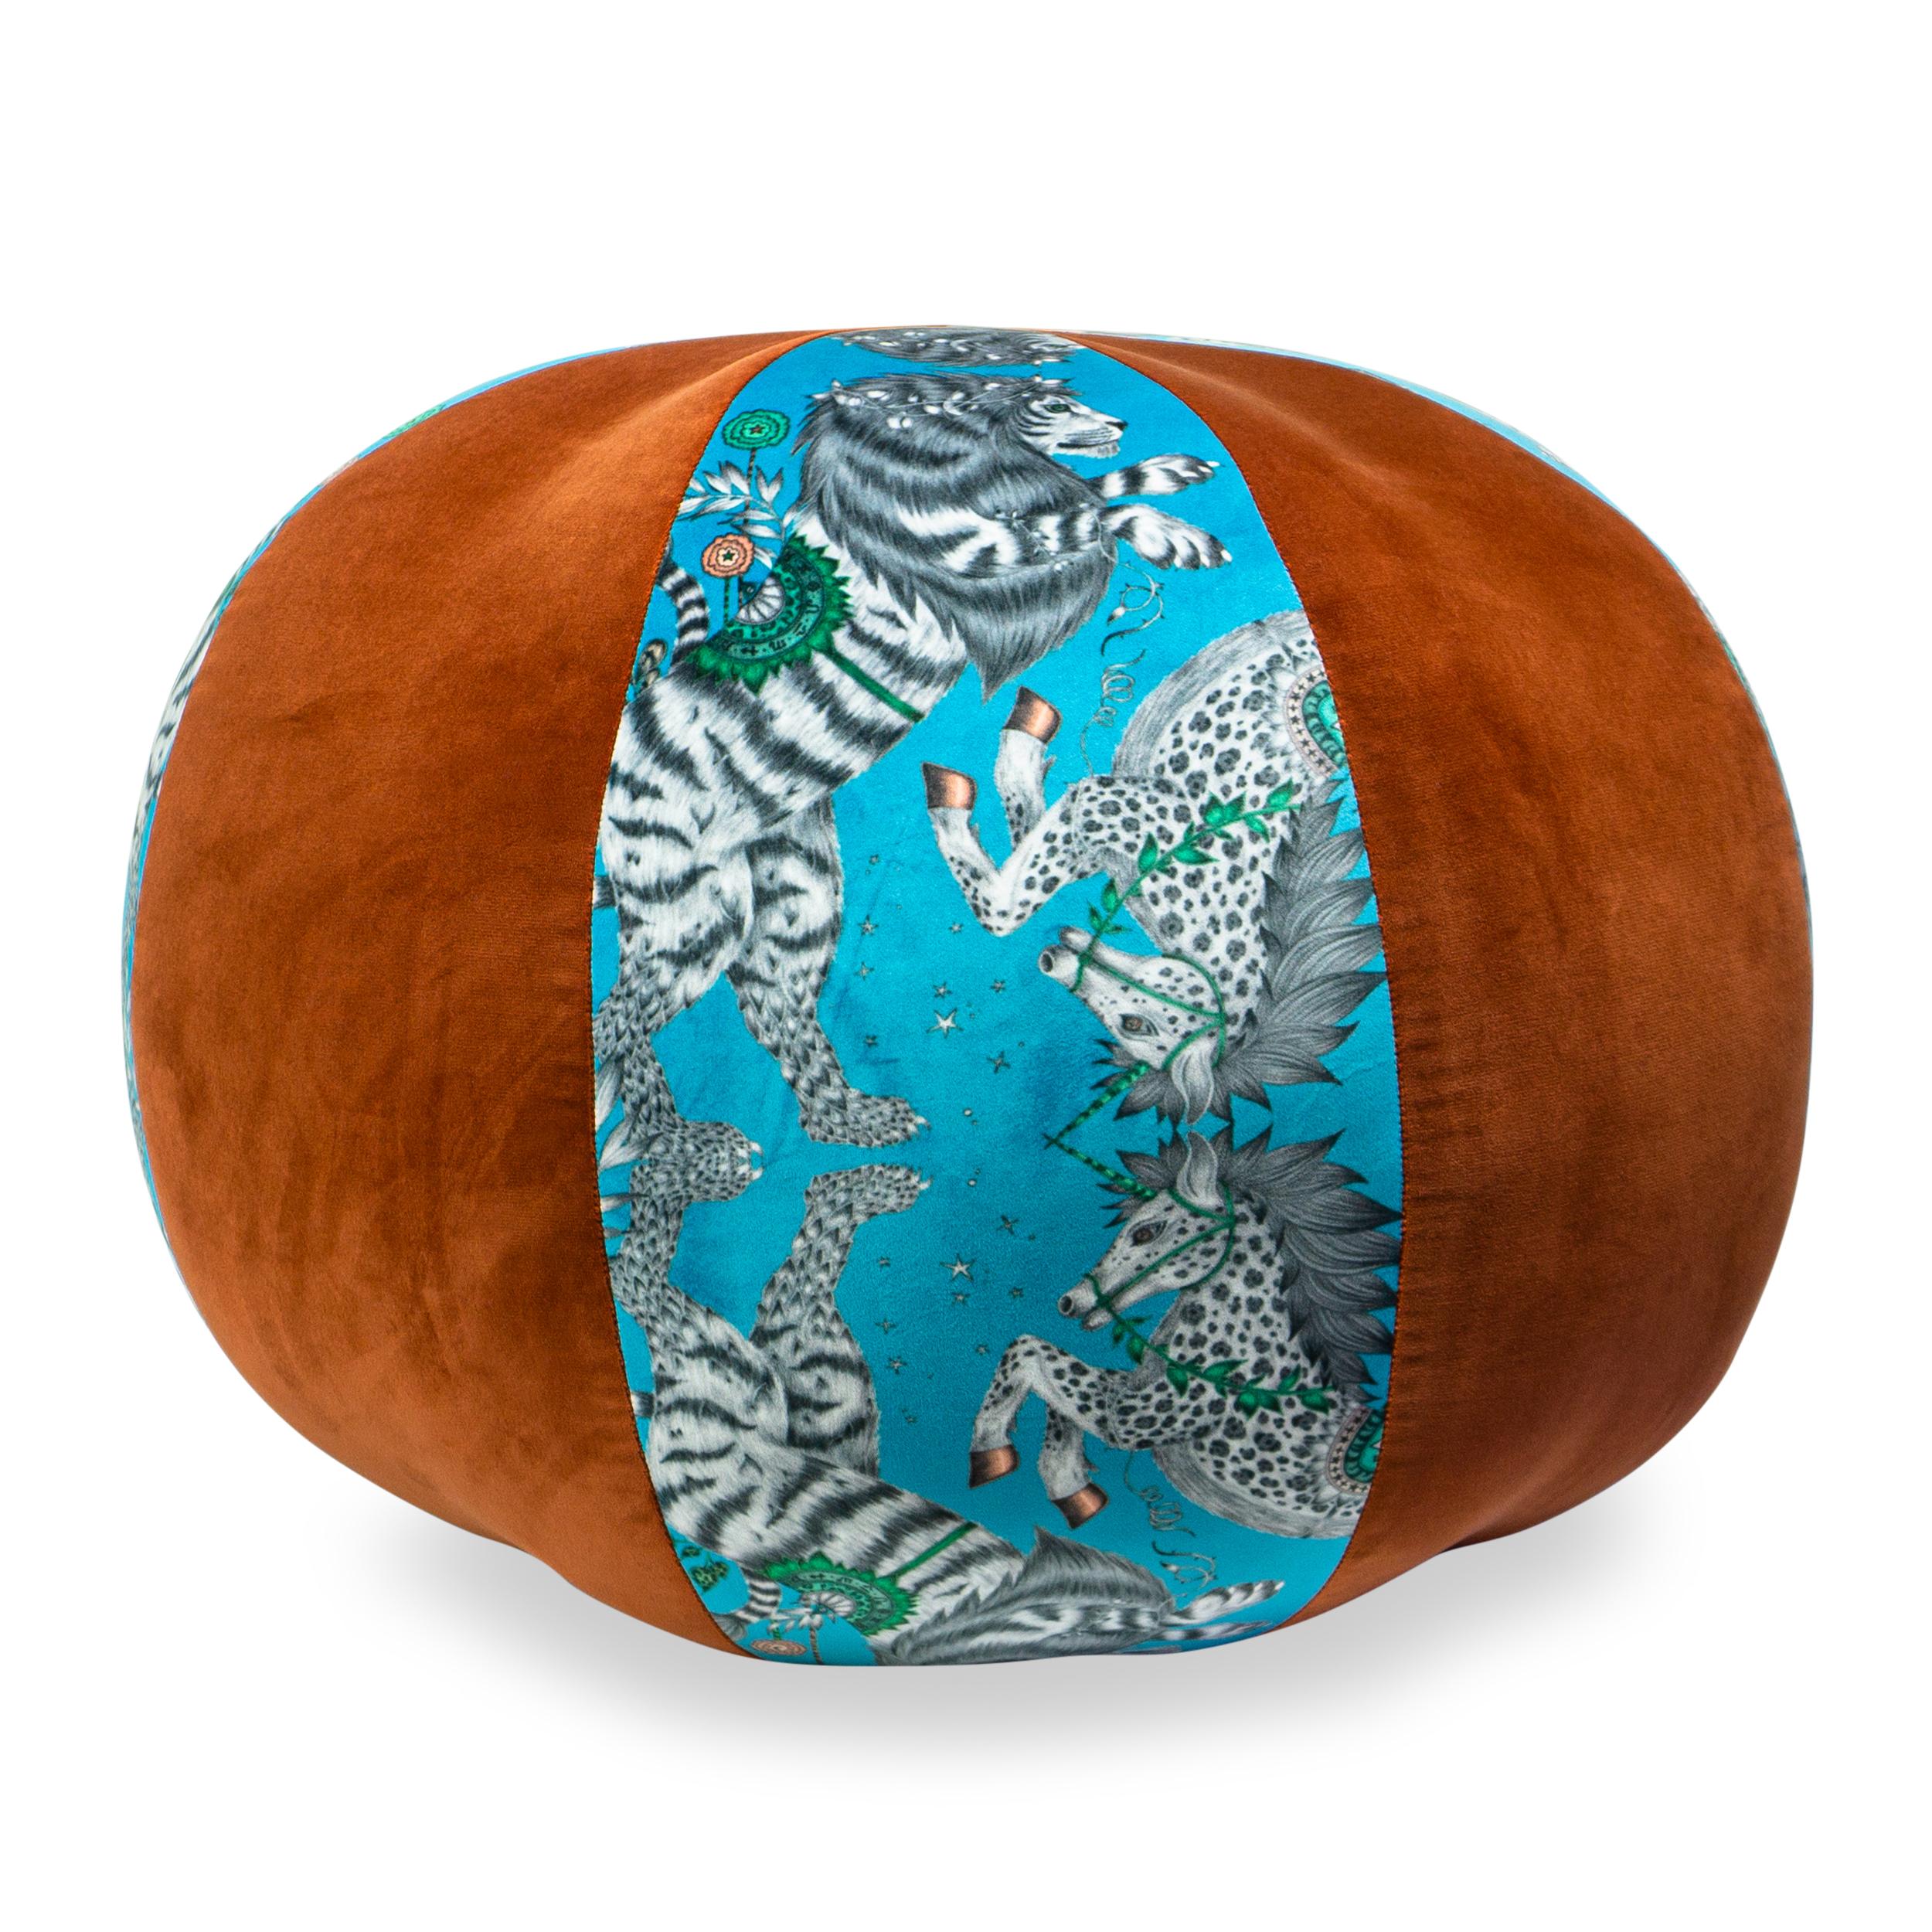 Pouf with beach ball inspired alternating fabrics. Emma Shipley fantastical printed velvet and paprika solid velvet. Handmade in Norwalk CT. Firm enough for use as an occasional chair or use as an ottoman, slides easily on floor.